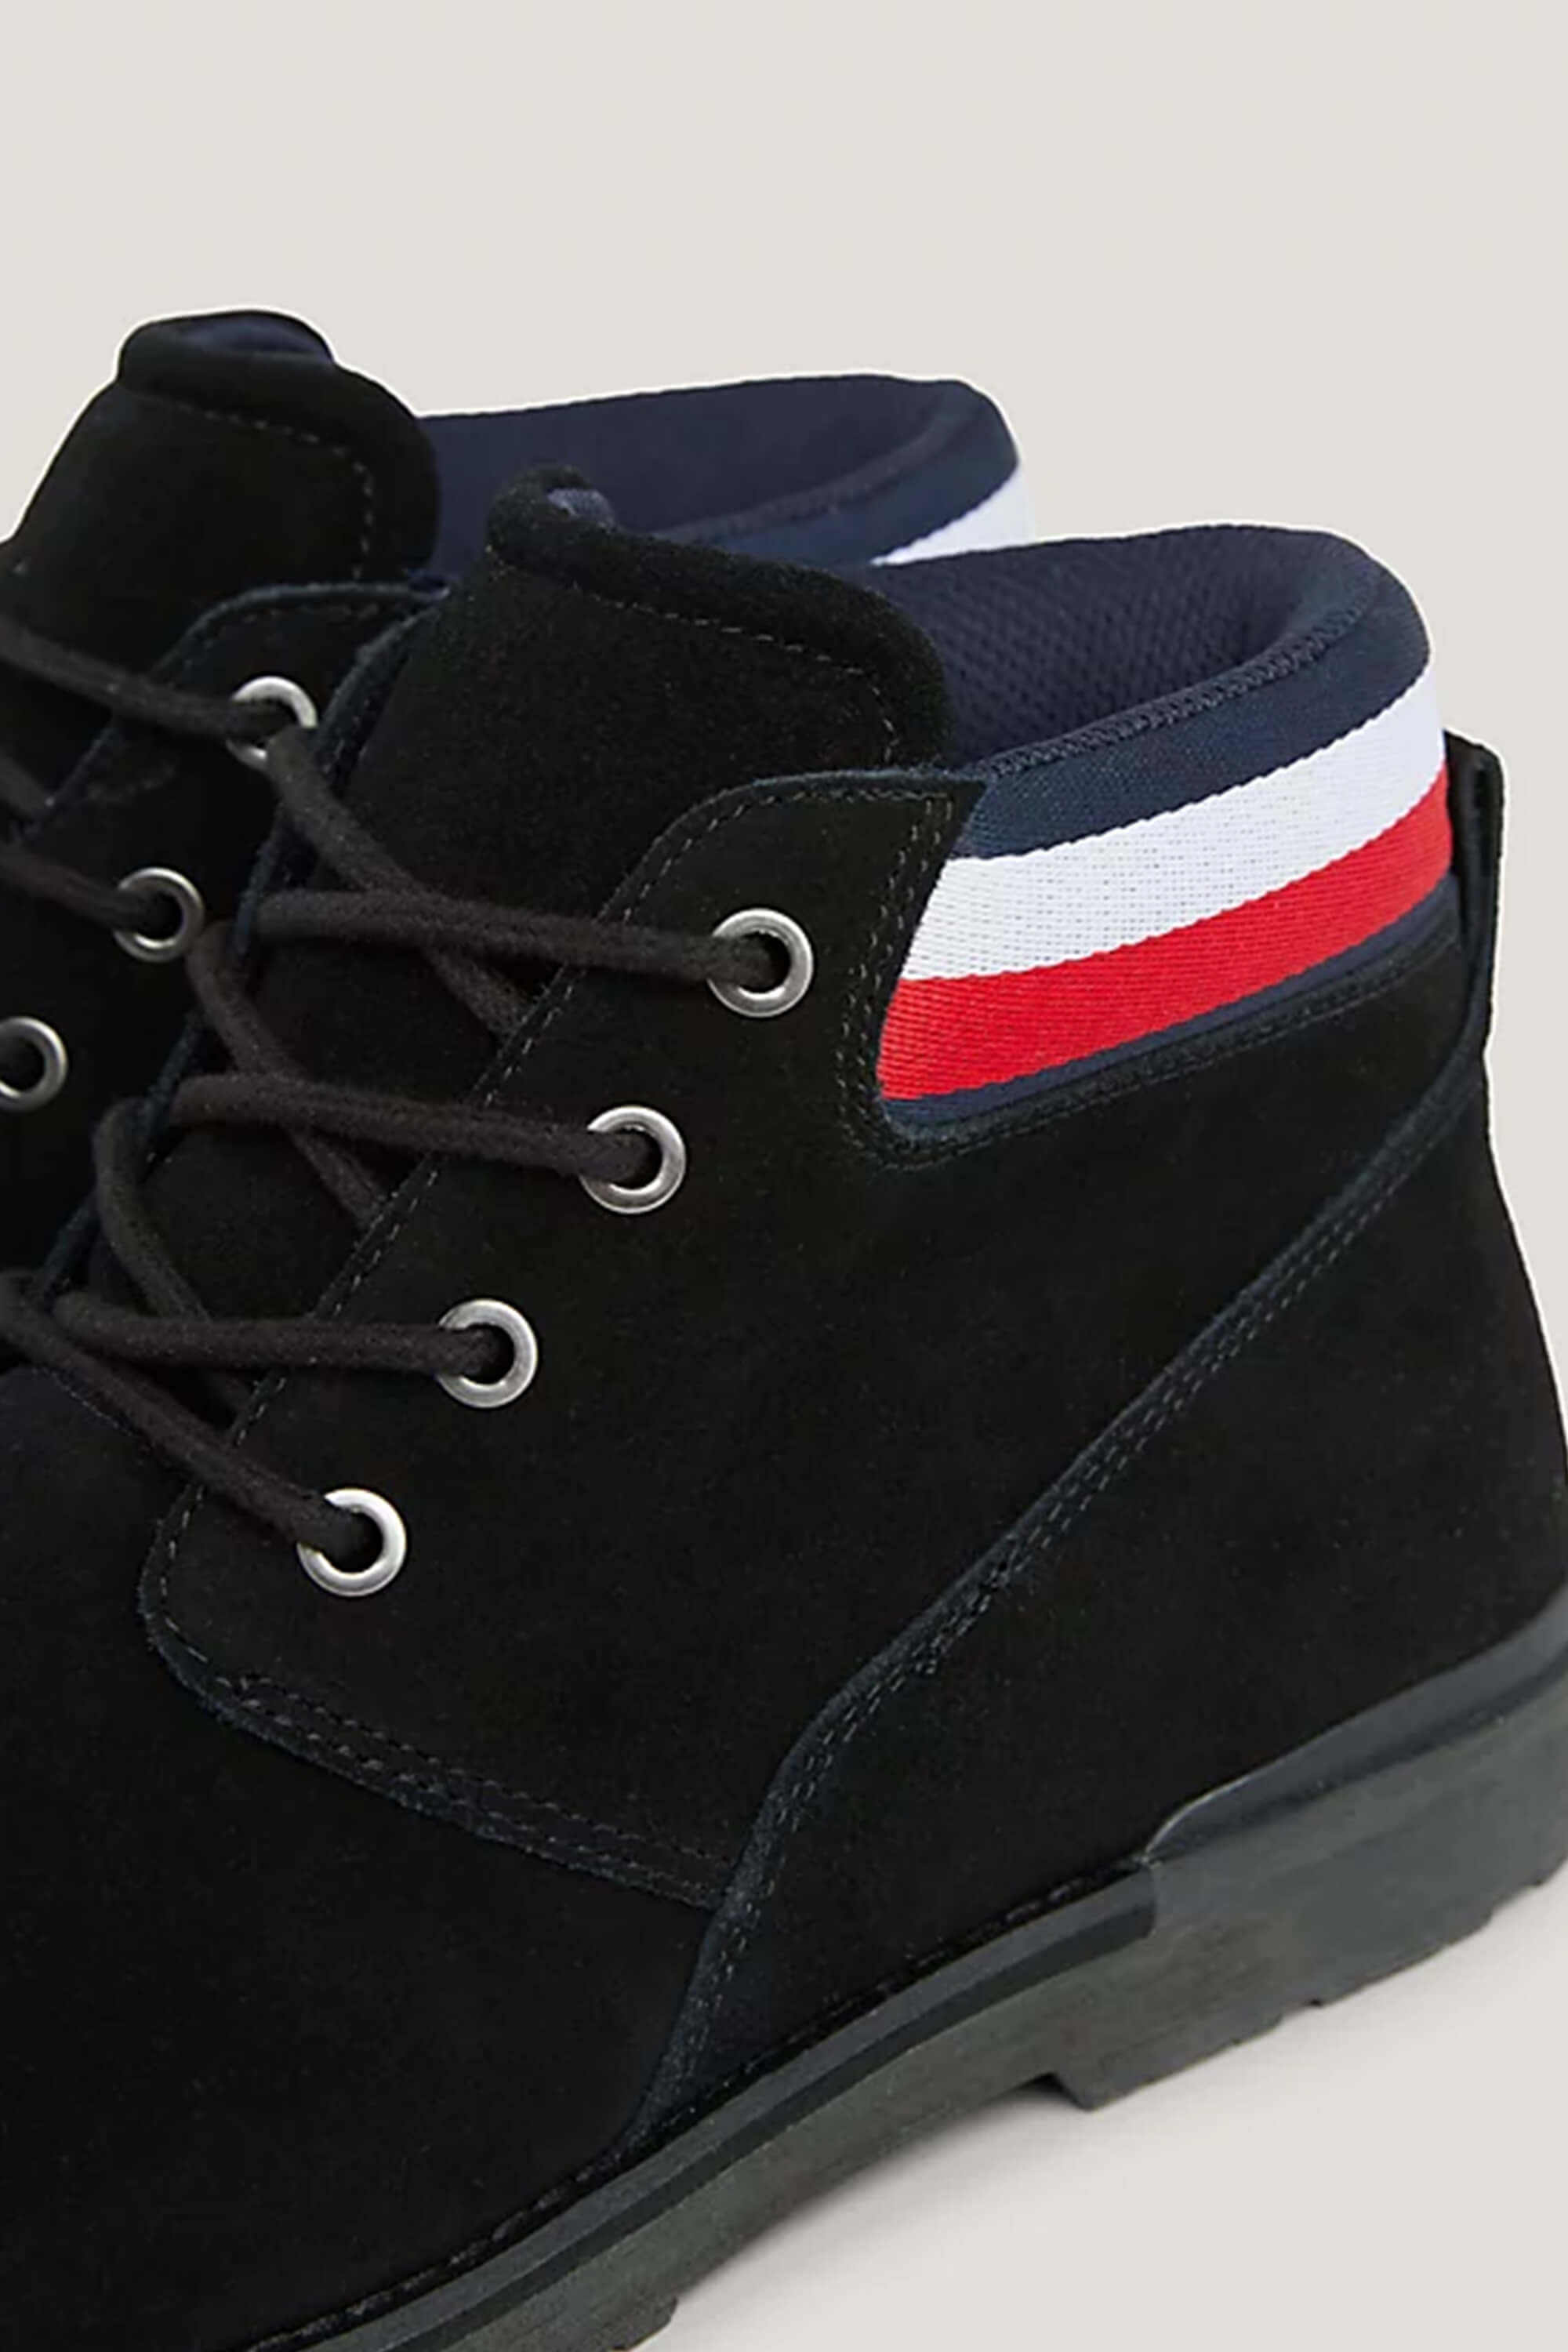 Tommy Hilfiger Core Suede Boot Black